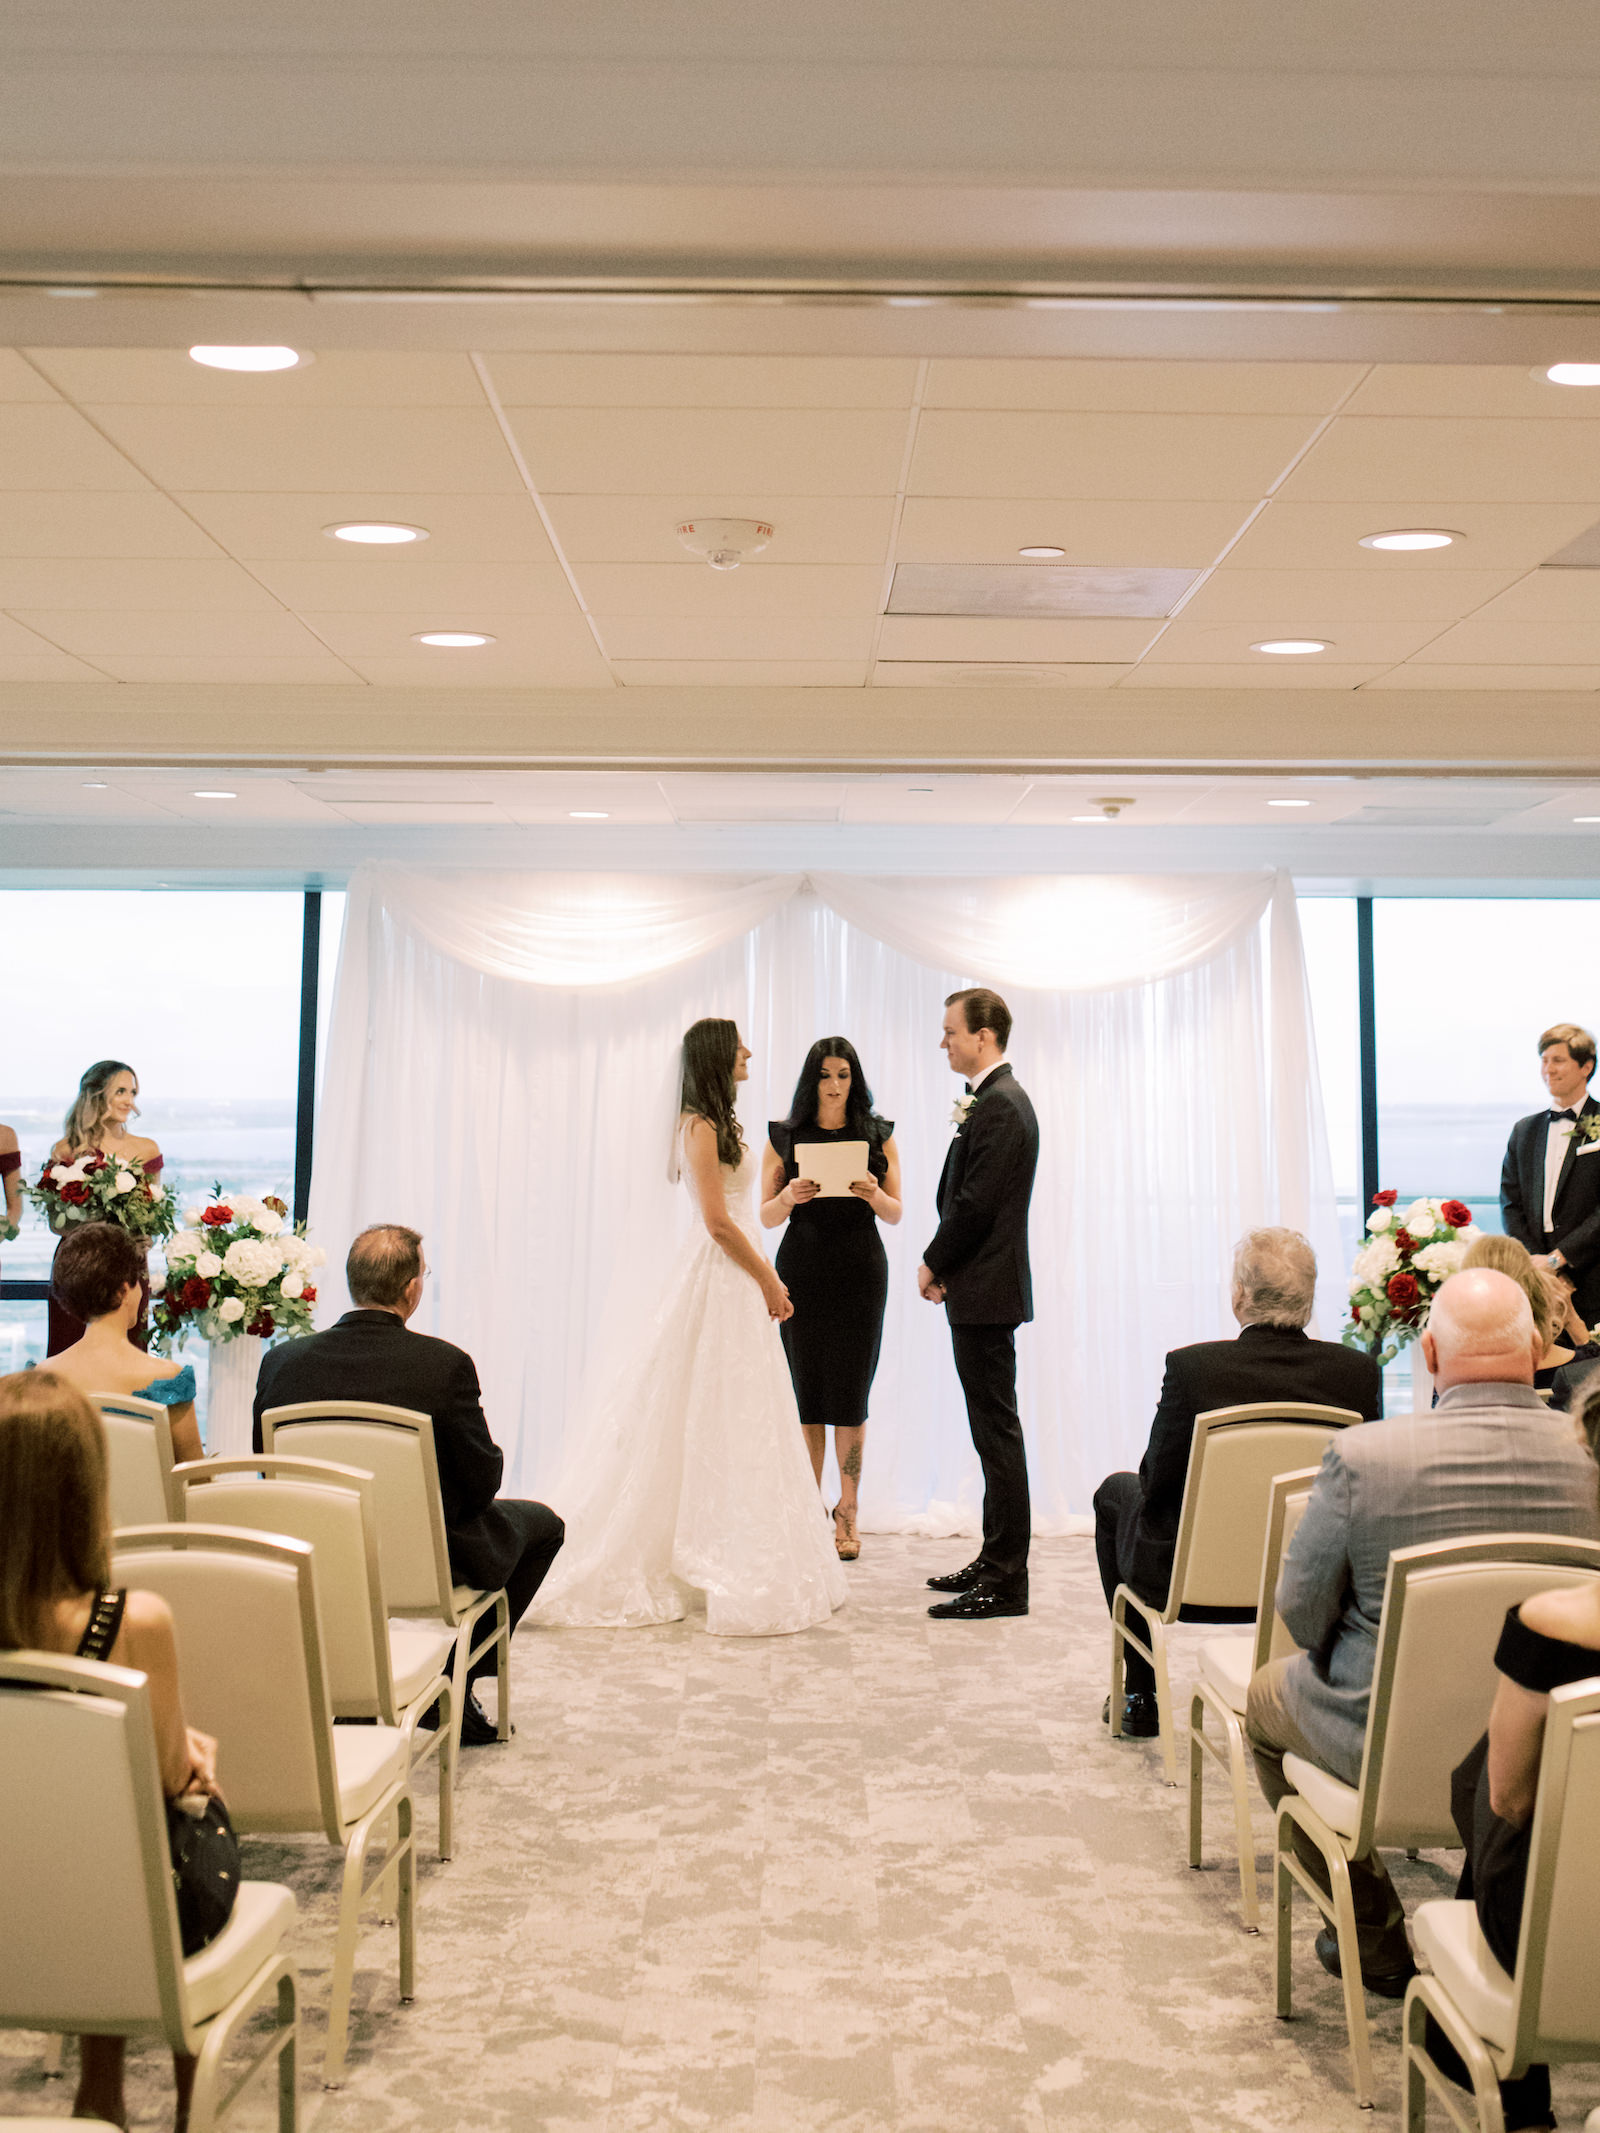 Indoor Tampa Wedding Ceremony at Downtown Tampa Wedding Venue The Tampa Club | Pipe and Drape Ceremony Backdrop | V Neck Embroidered Illusion Panel Allure Couture Designer Wedding Dress Bridal Gown | Groom in Classic Black Suit Tux with Bow Tie